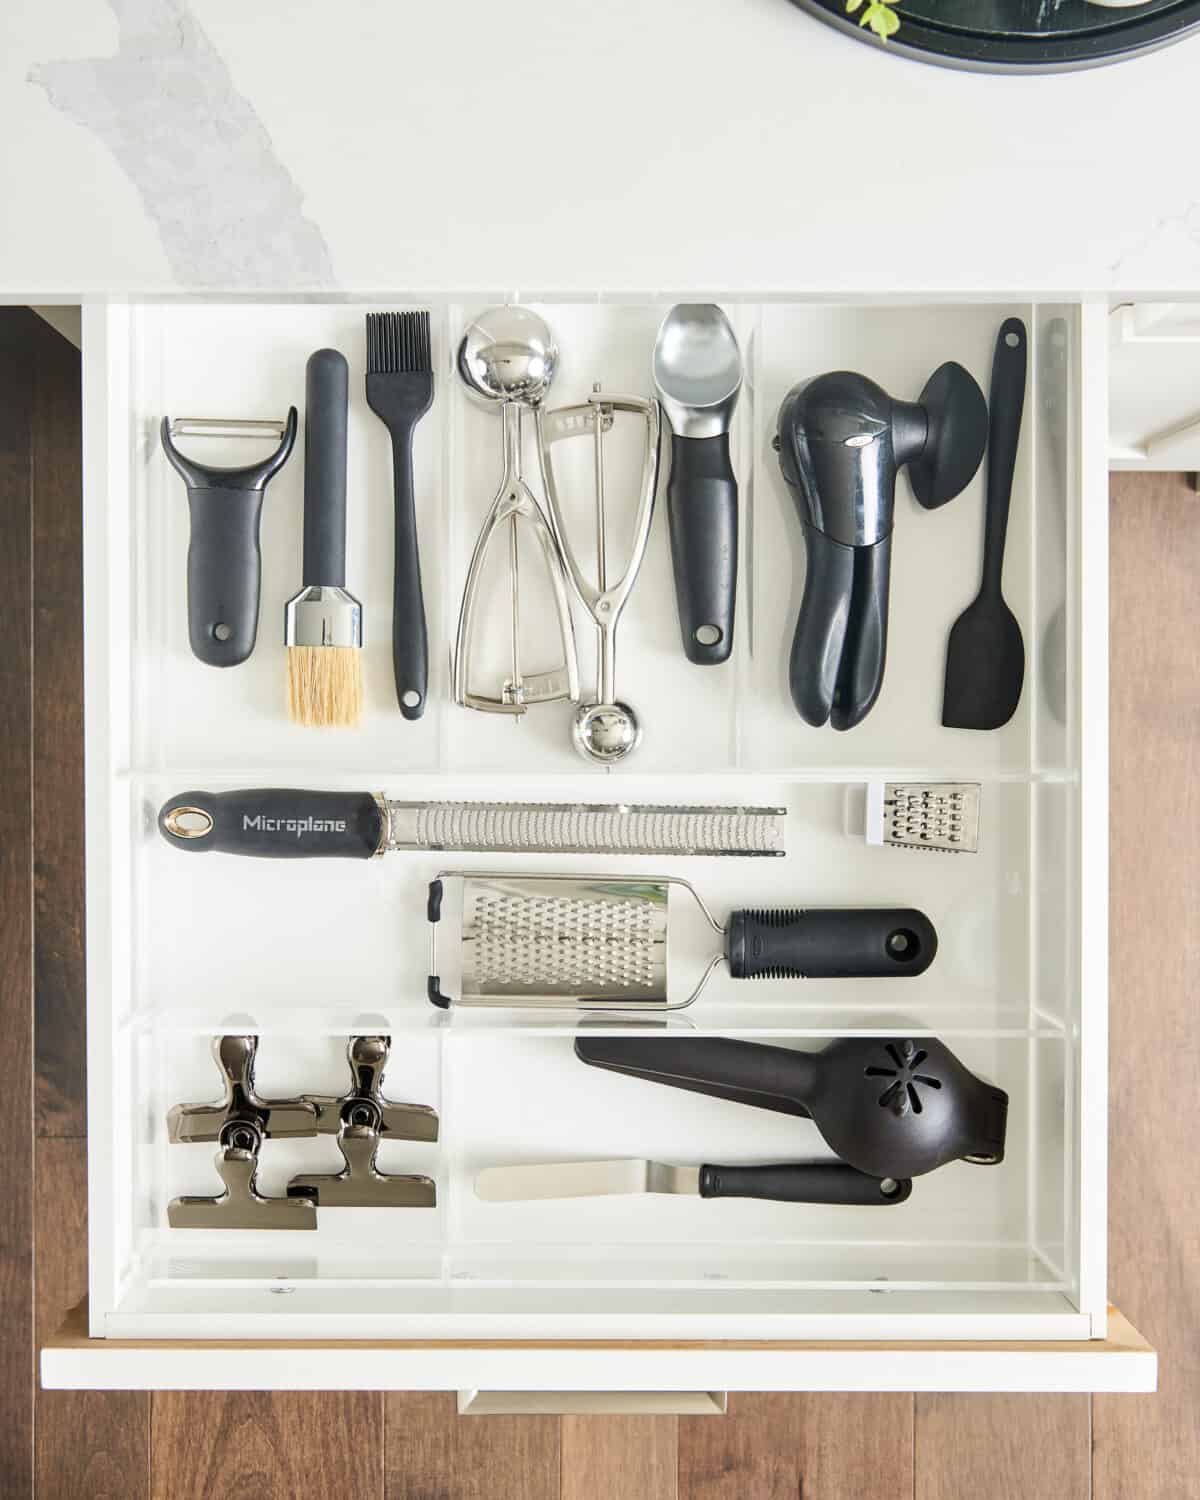 kitchen tools in a drawer.